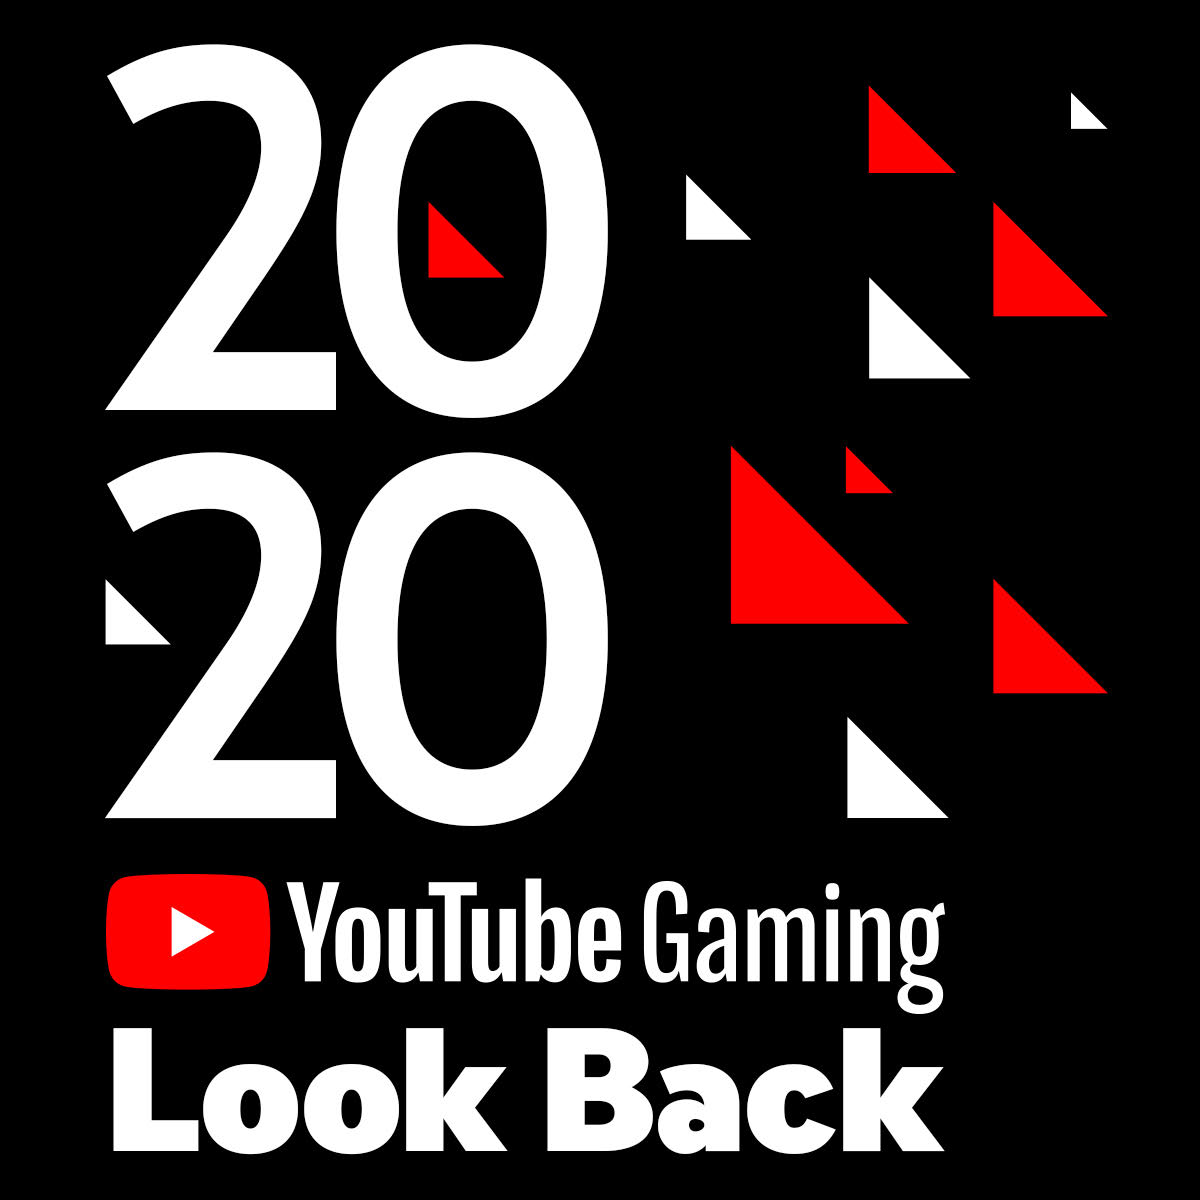 2020 Is YouTube Gaming’s Biggest Year, Ever